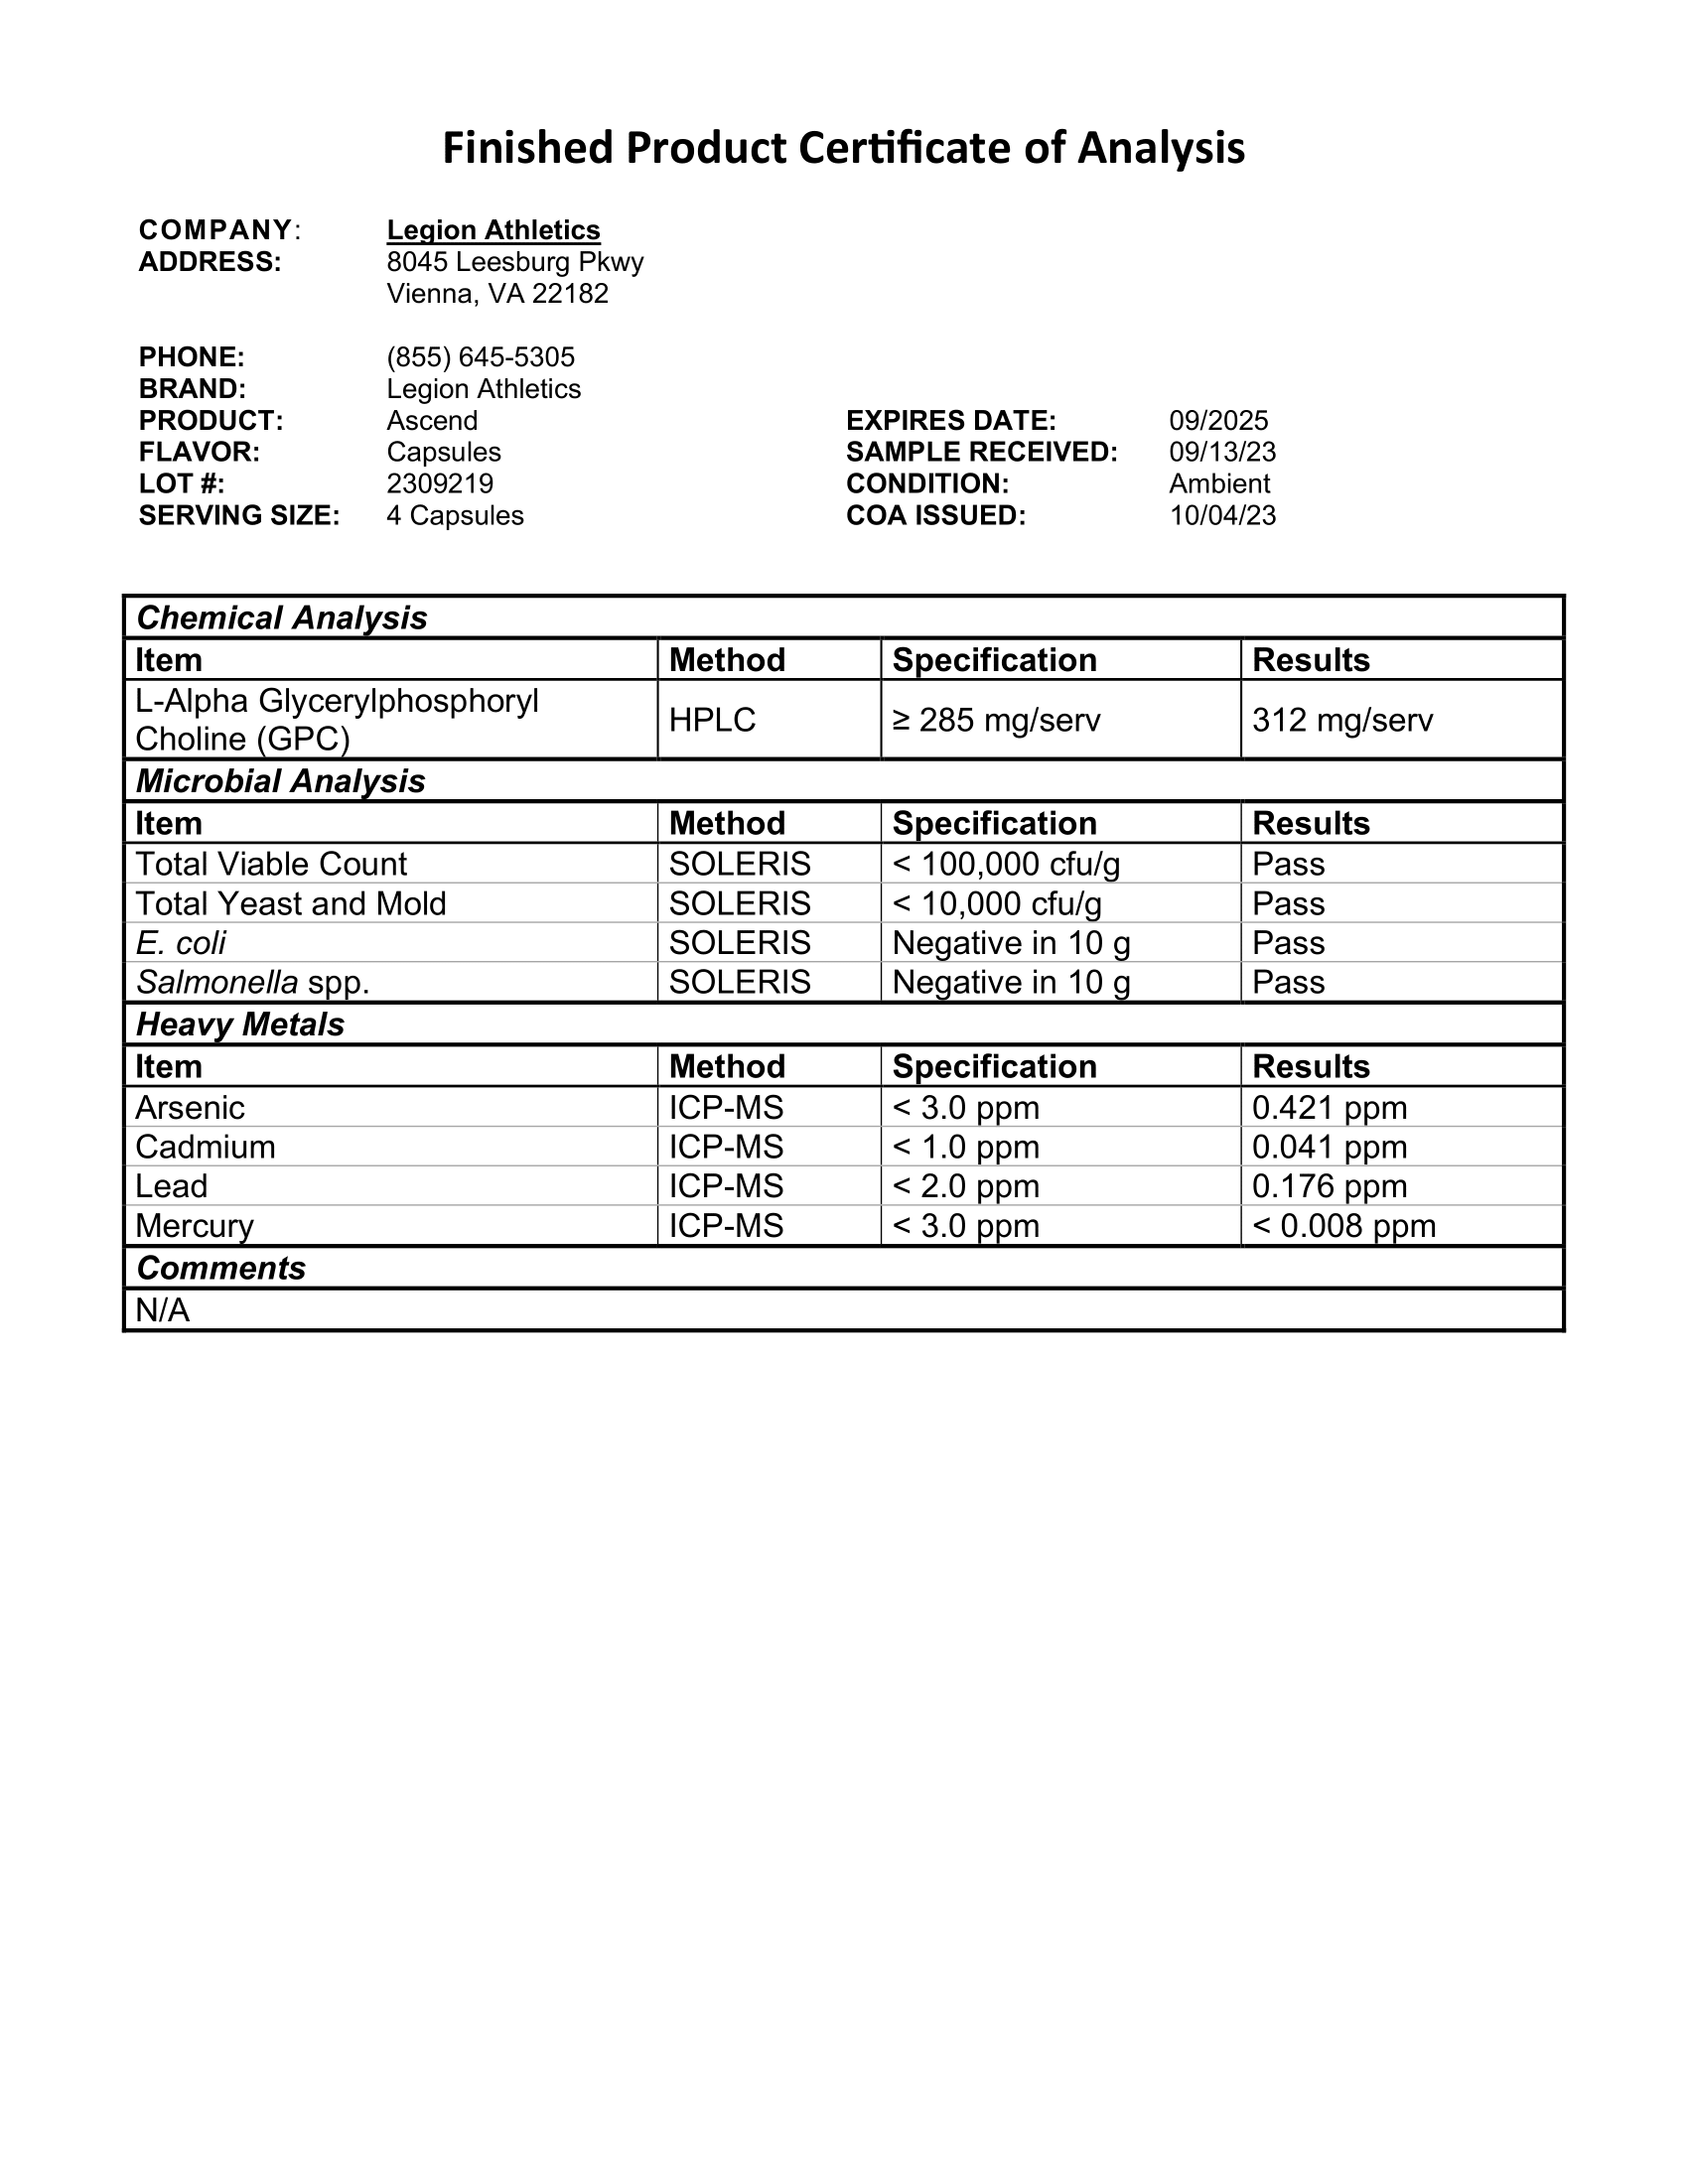 Ascend Lab Test Certificate of Analysis